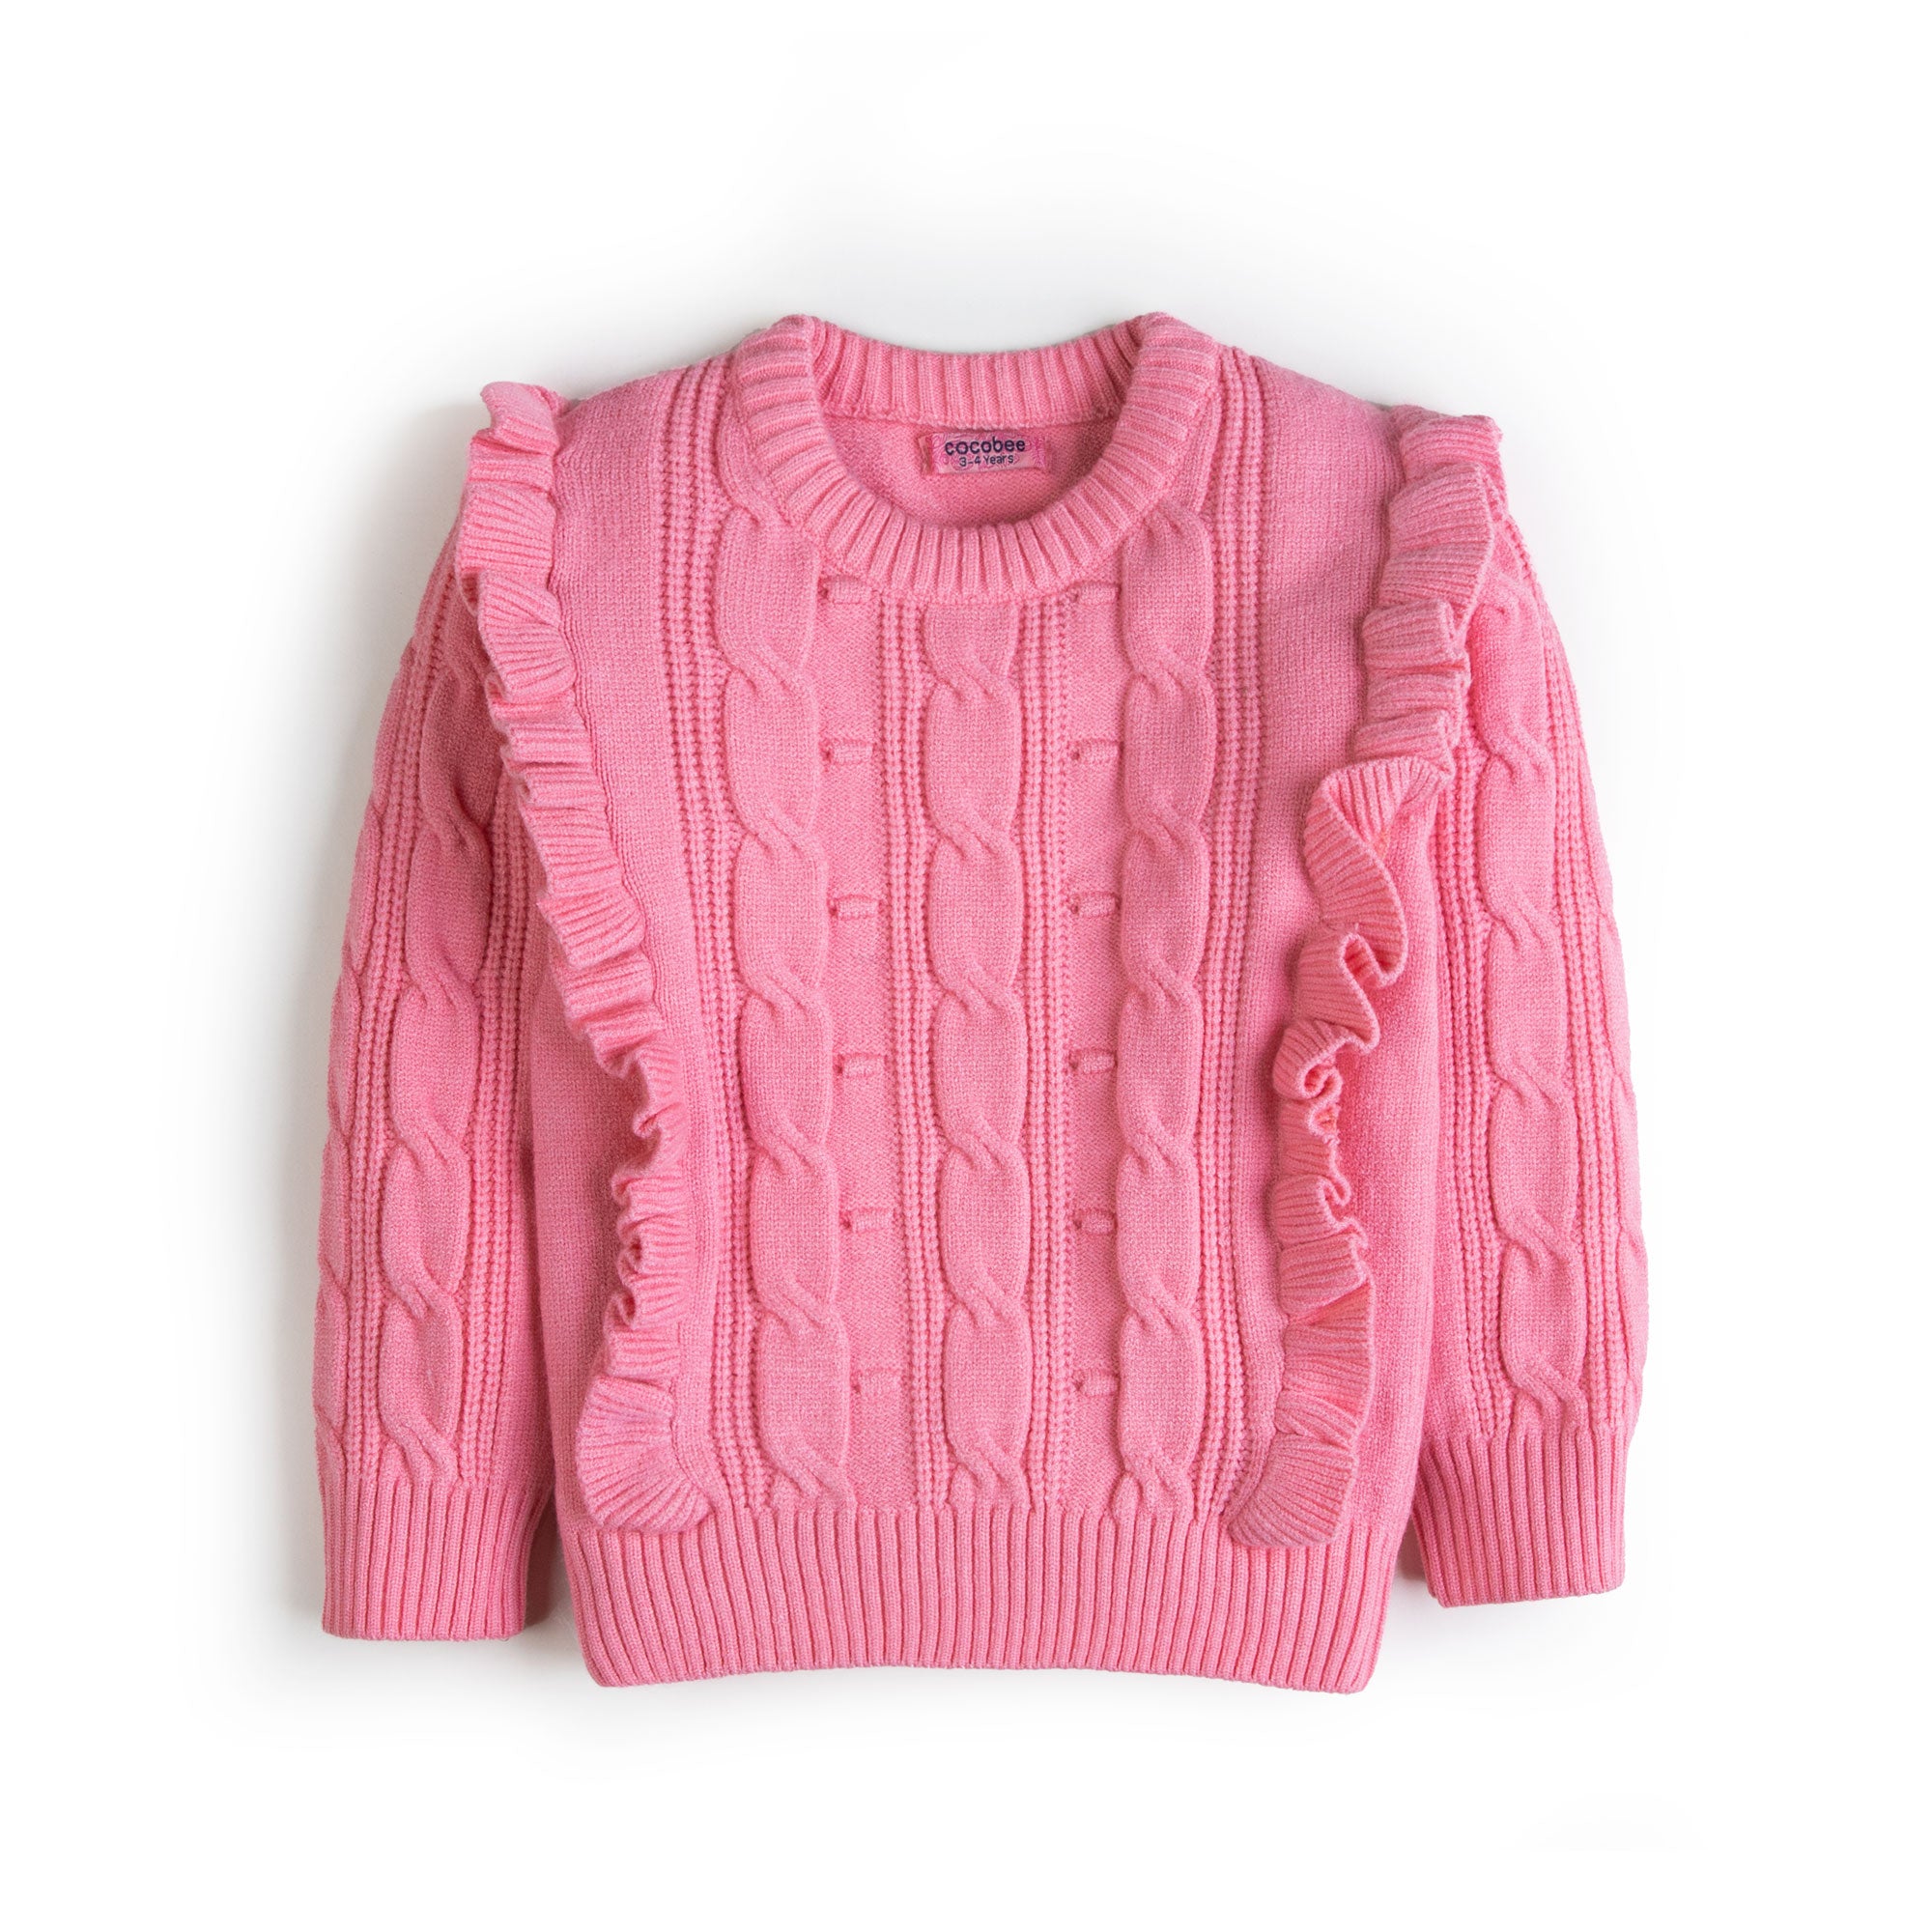 Starling Pink Sweater